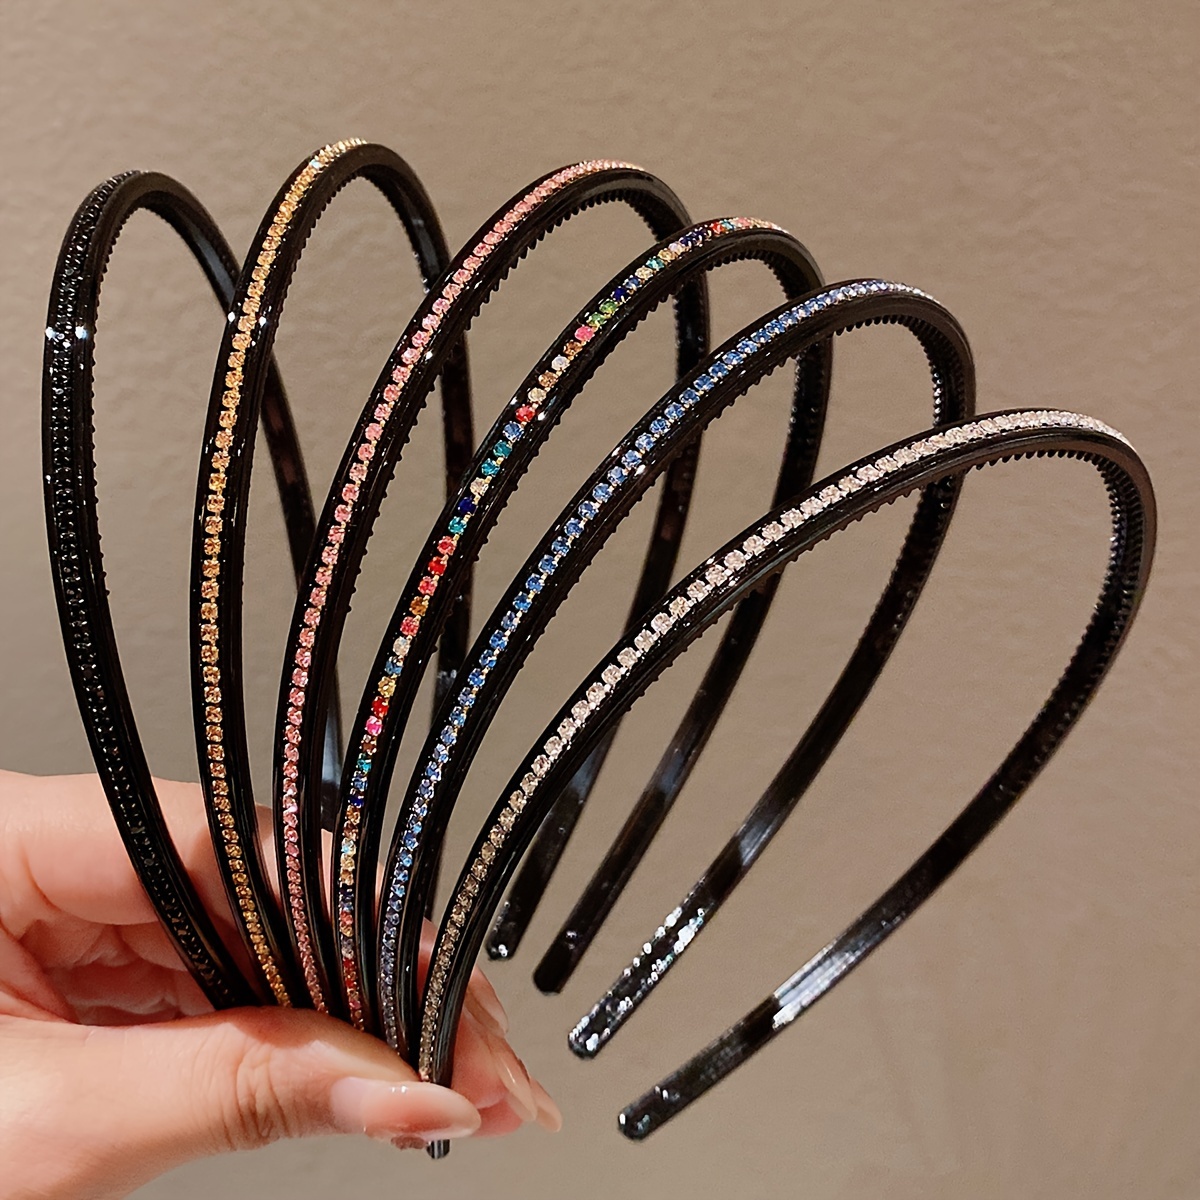 

6-pack Vintage Rhinestone Hairbands For Women - Non-slip, Fashionable Headbands With Teeth Grip For Stylish Updos & Face Washing Hair Accessories For Women Hair Accessories